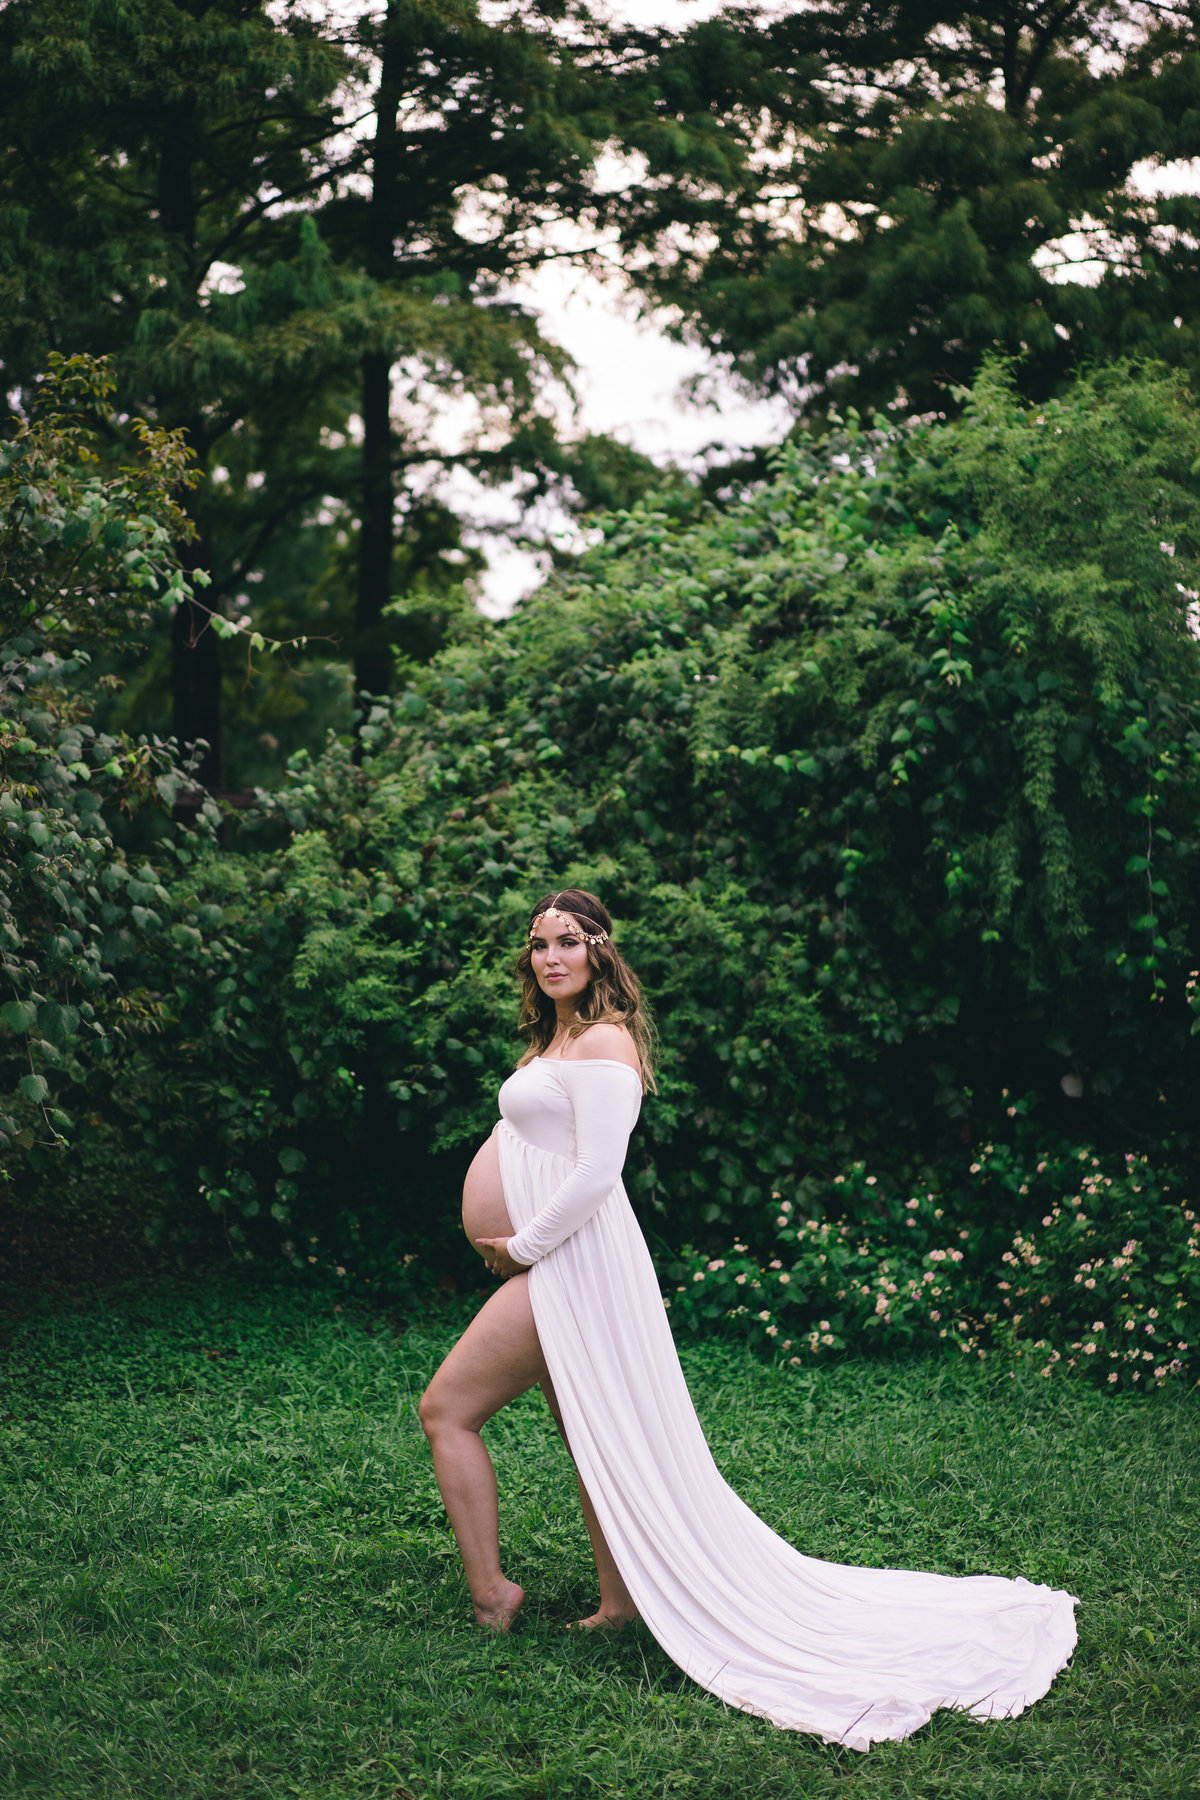 Woman in luscious green field posing for her maternity photography photo shoot in a white dress and is flowing in the wind.